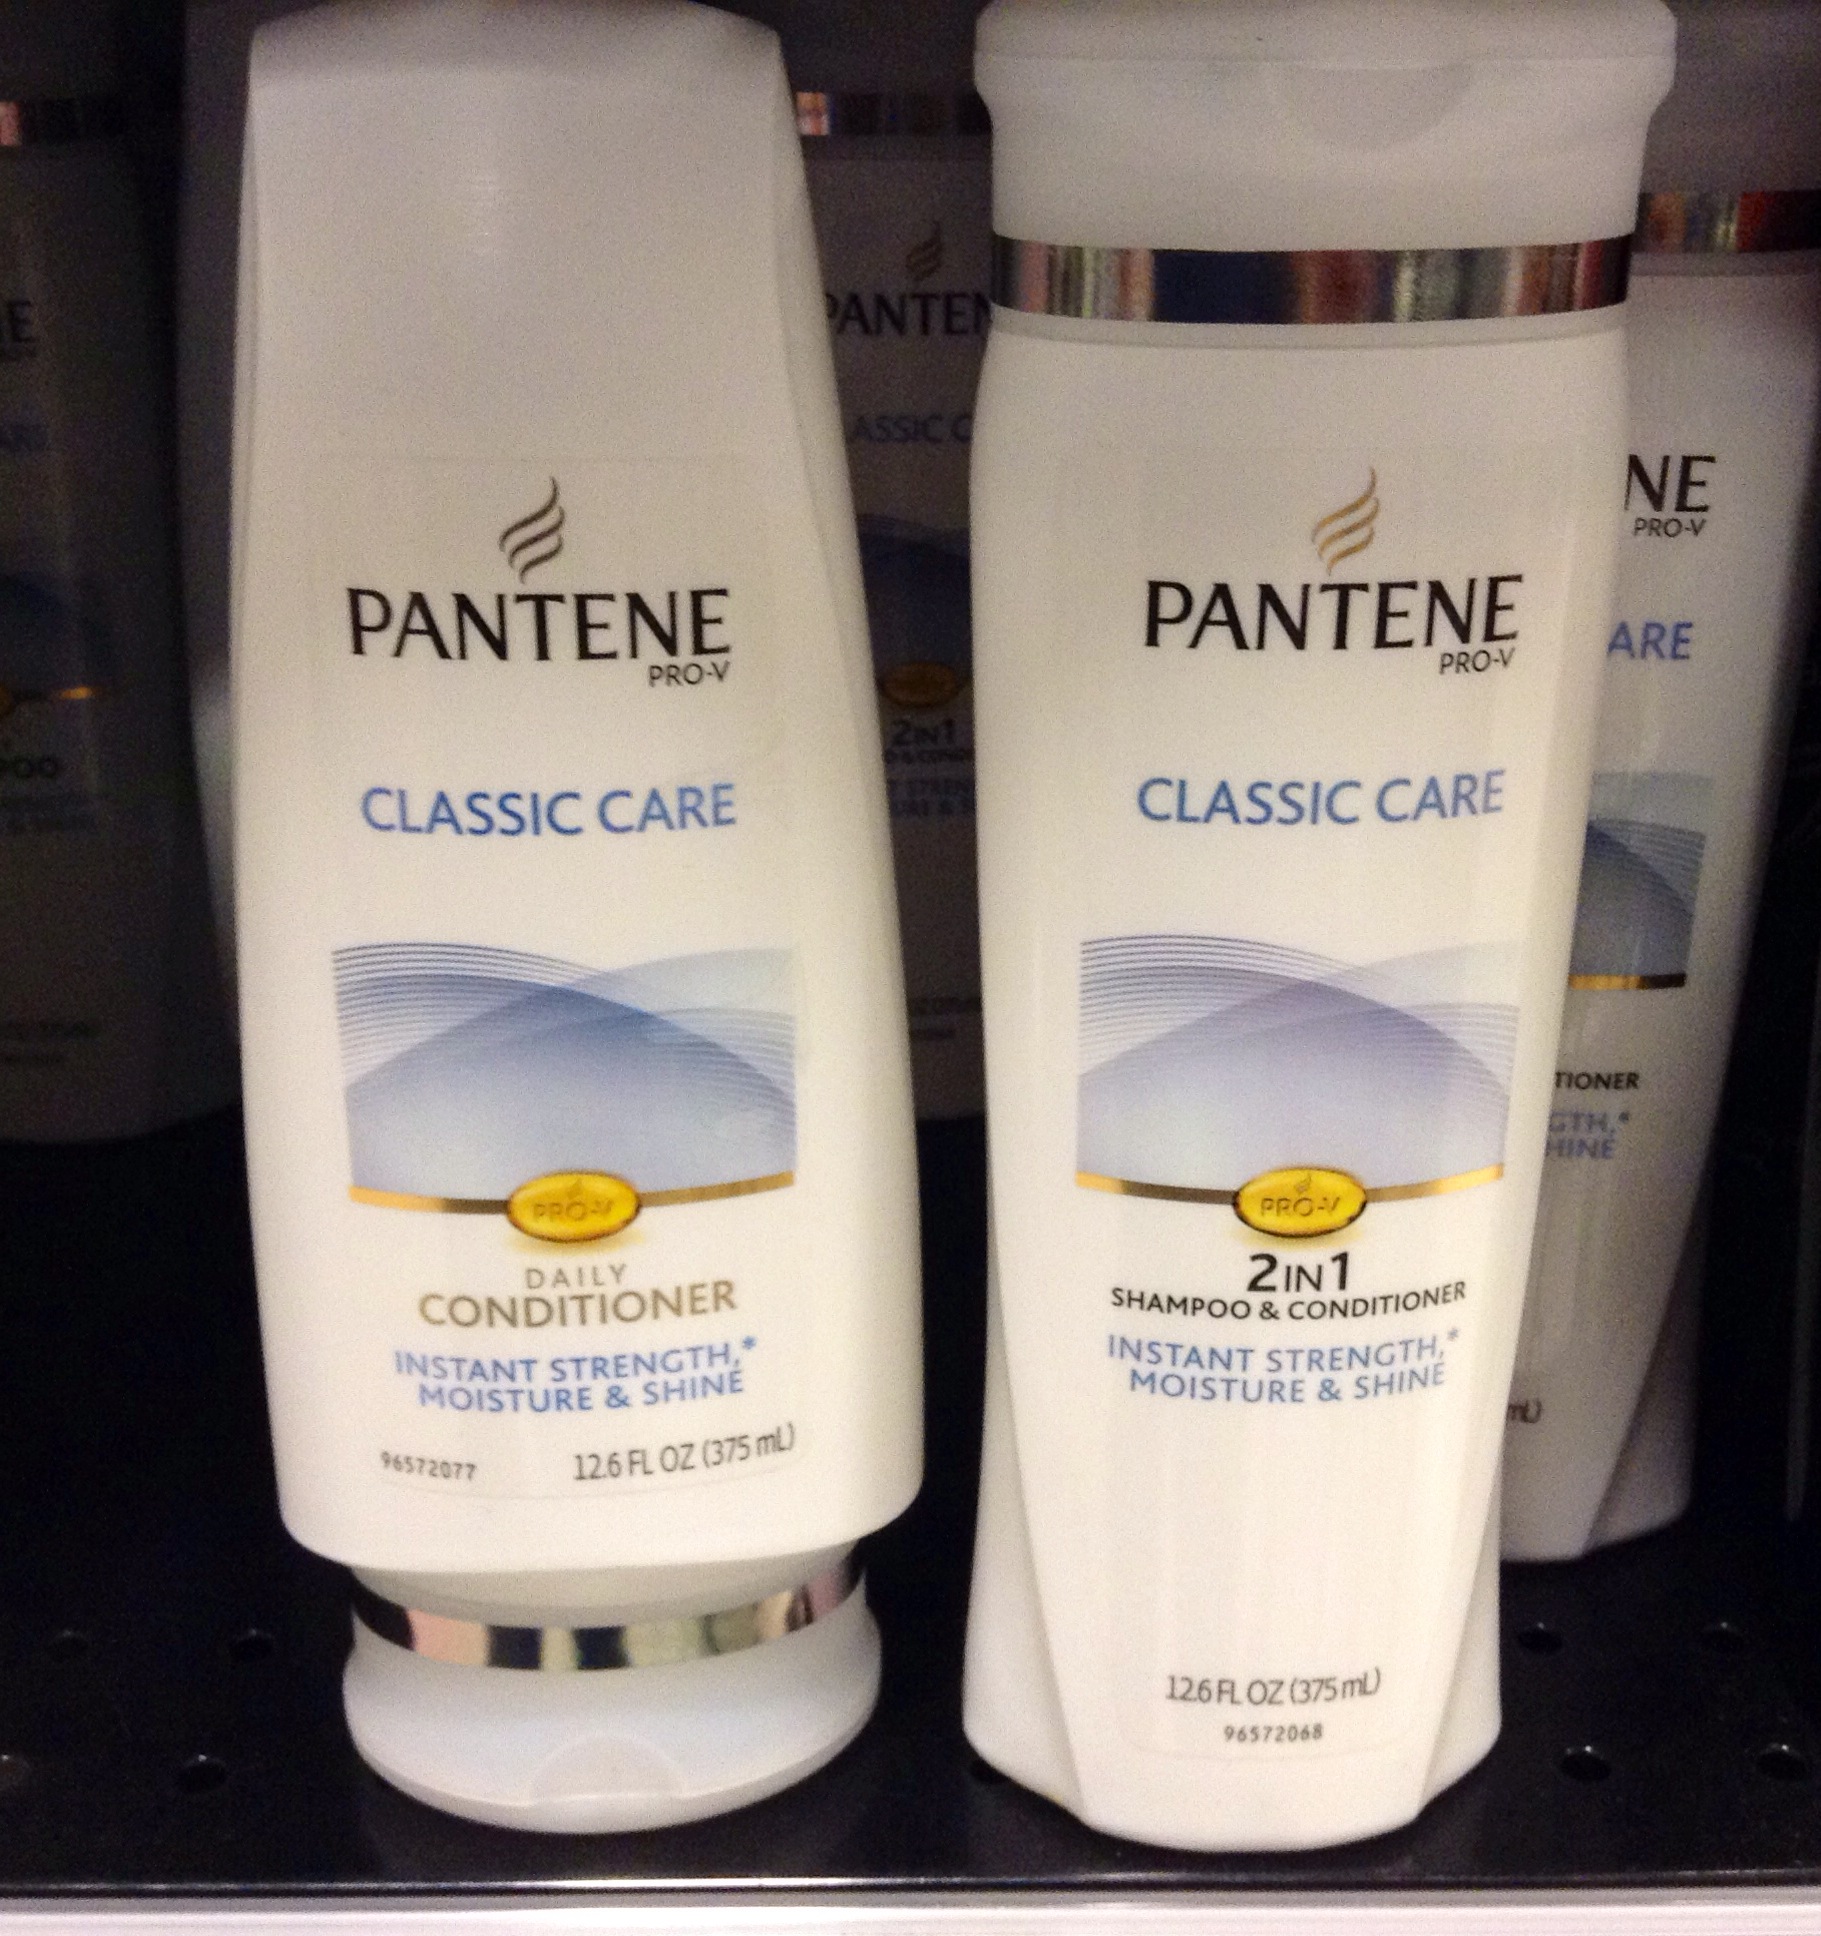 a pair of pantene hair care products on display